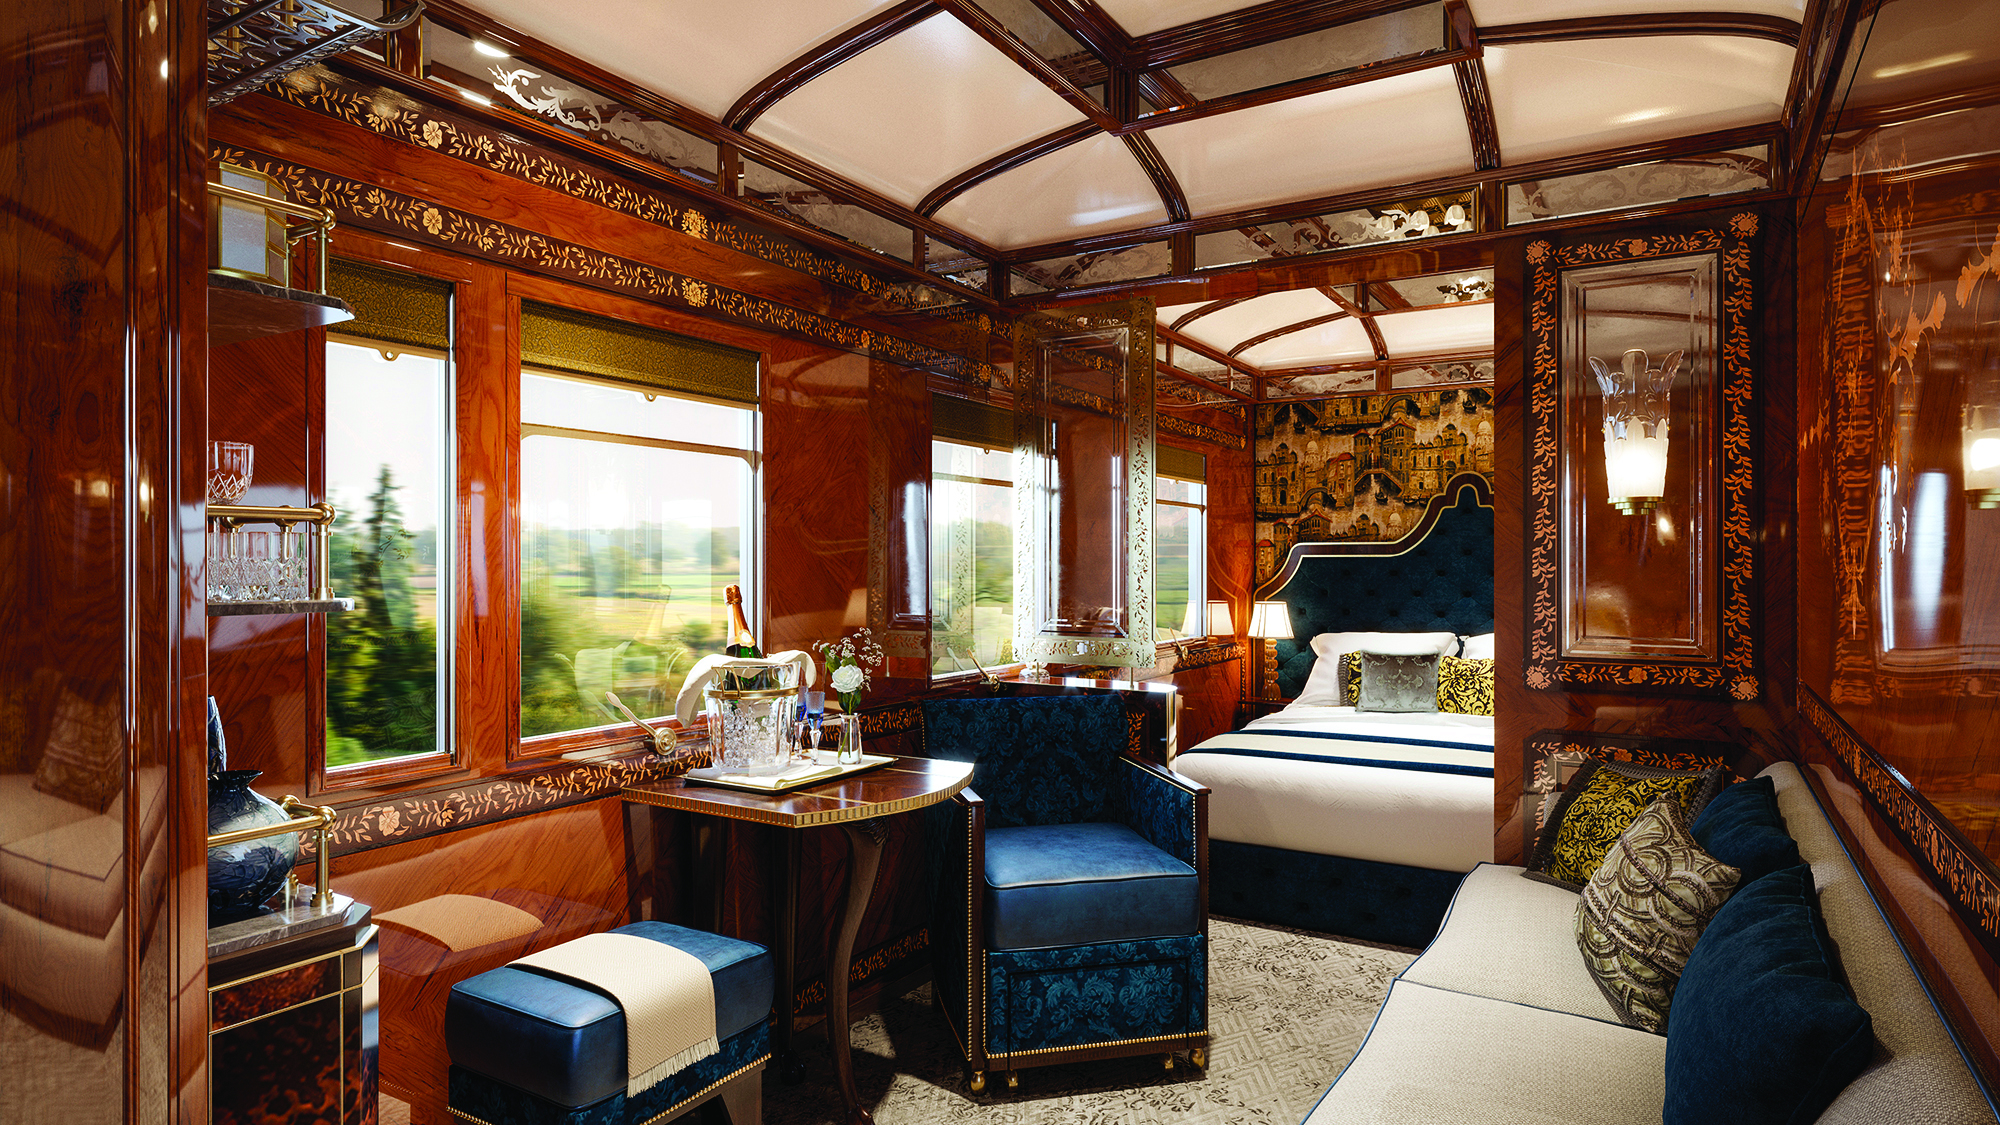 Experience a fresh vision of Venice - Belmond